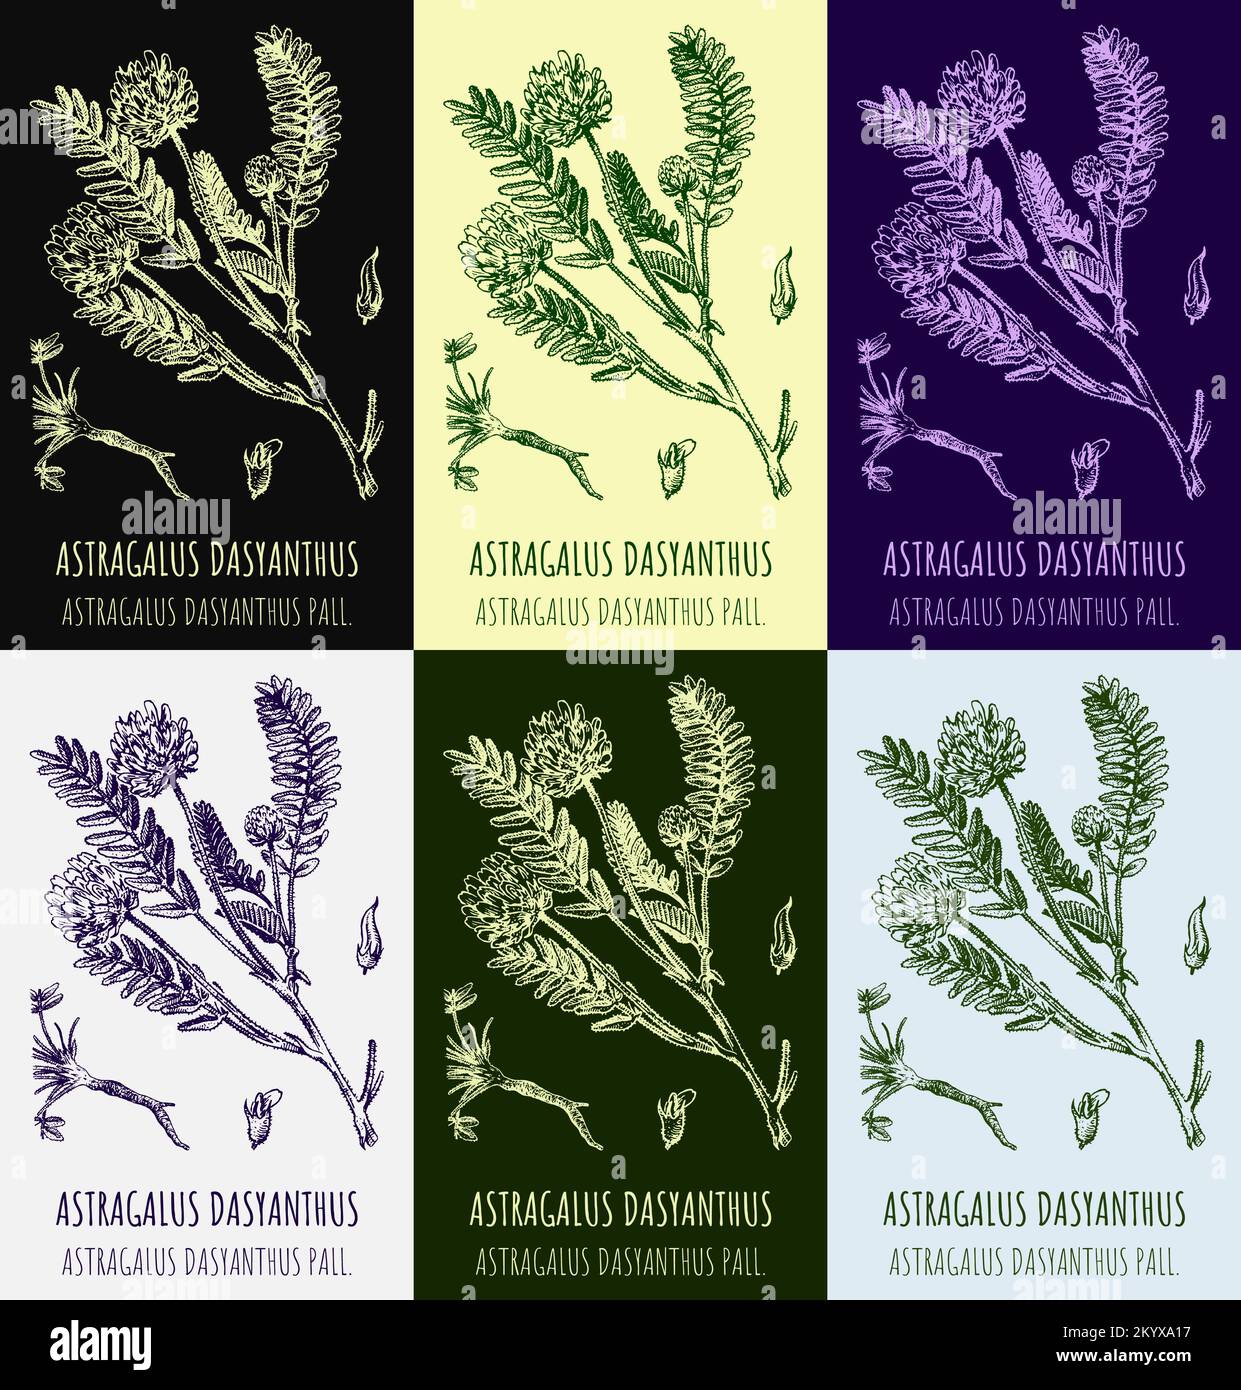 Set of vector drawings of astragalus in different colors. Hand drawn illustration. Latin name Astragalus dasyanthus. Stock Photo